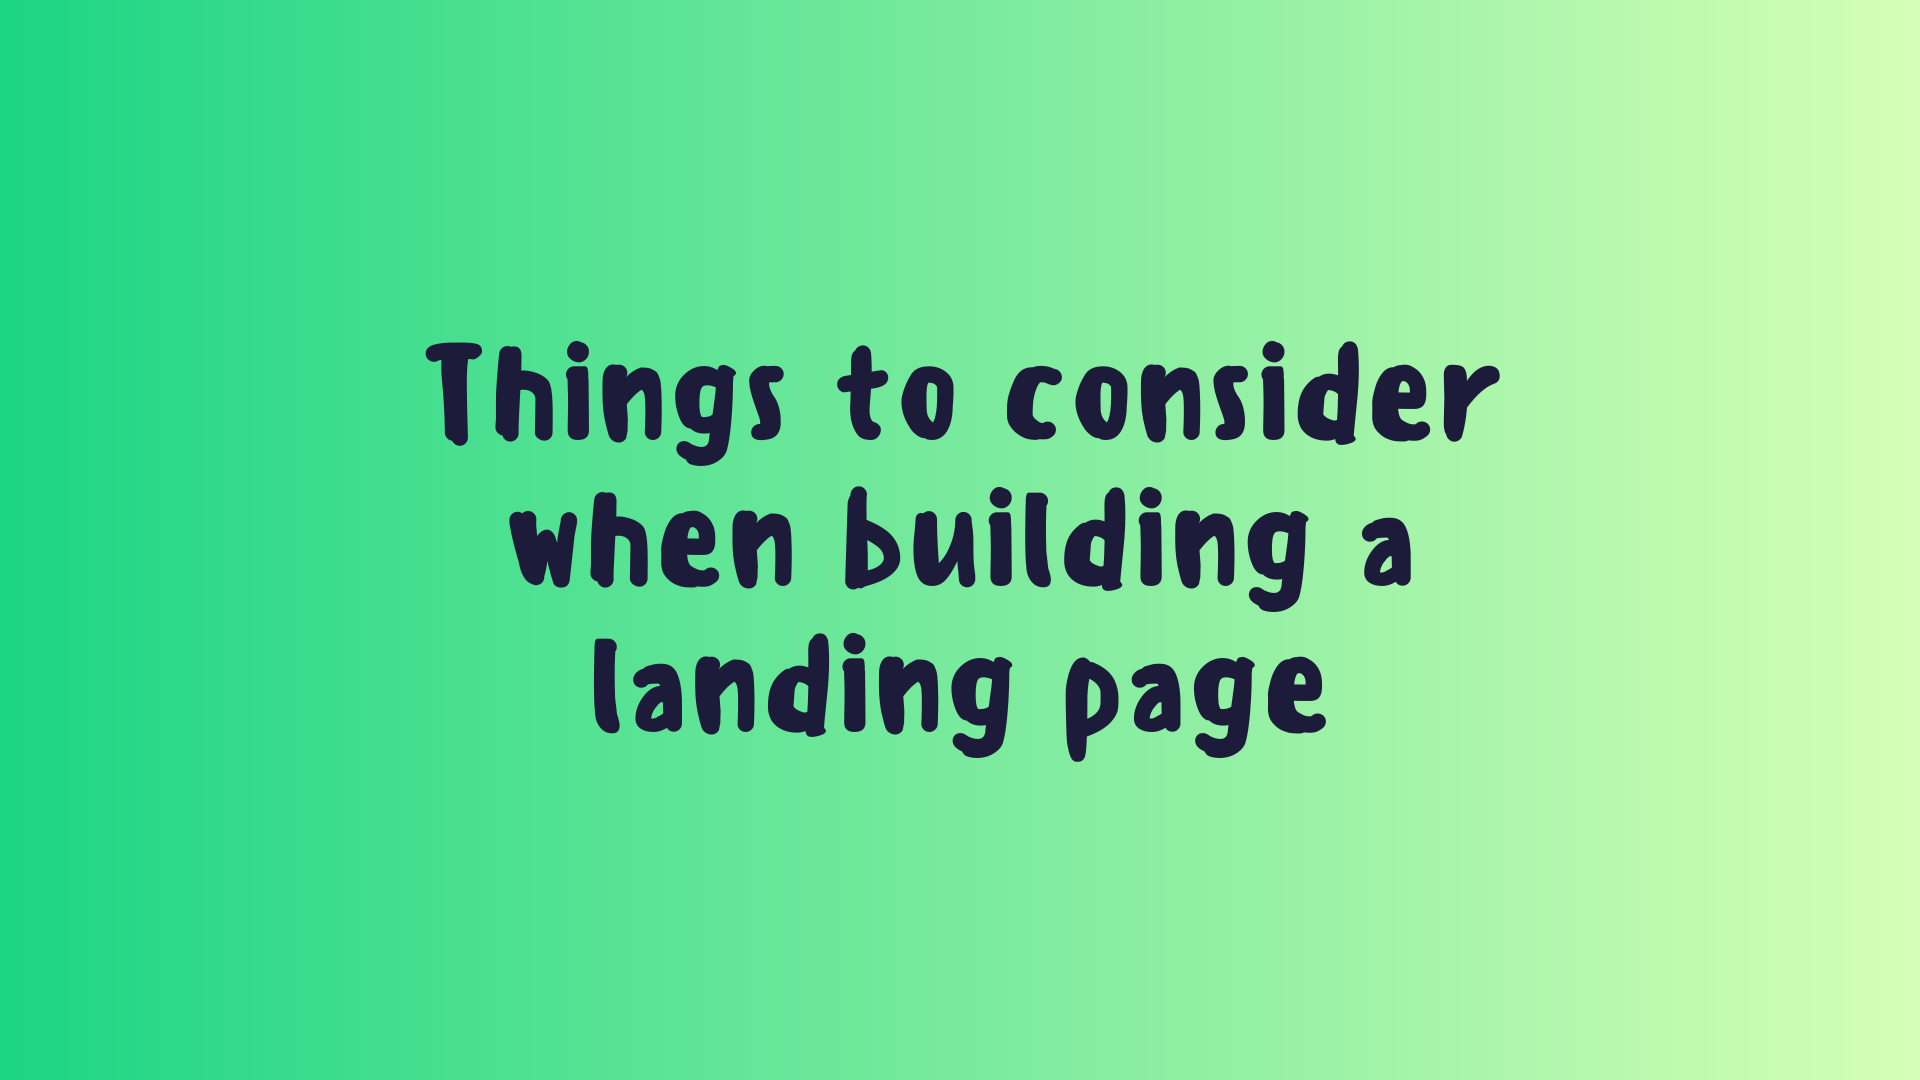 Things to consider when building a landing page